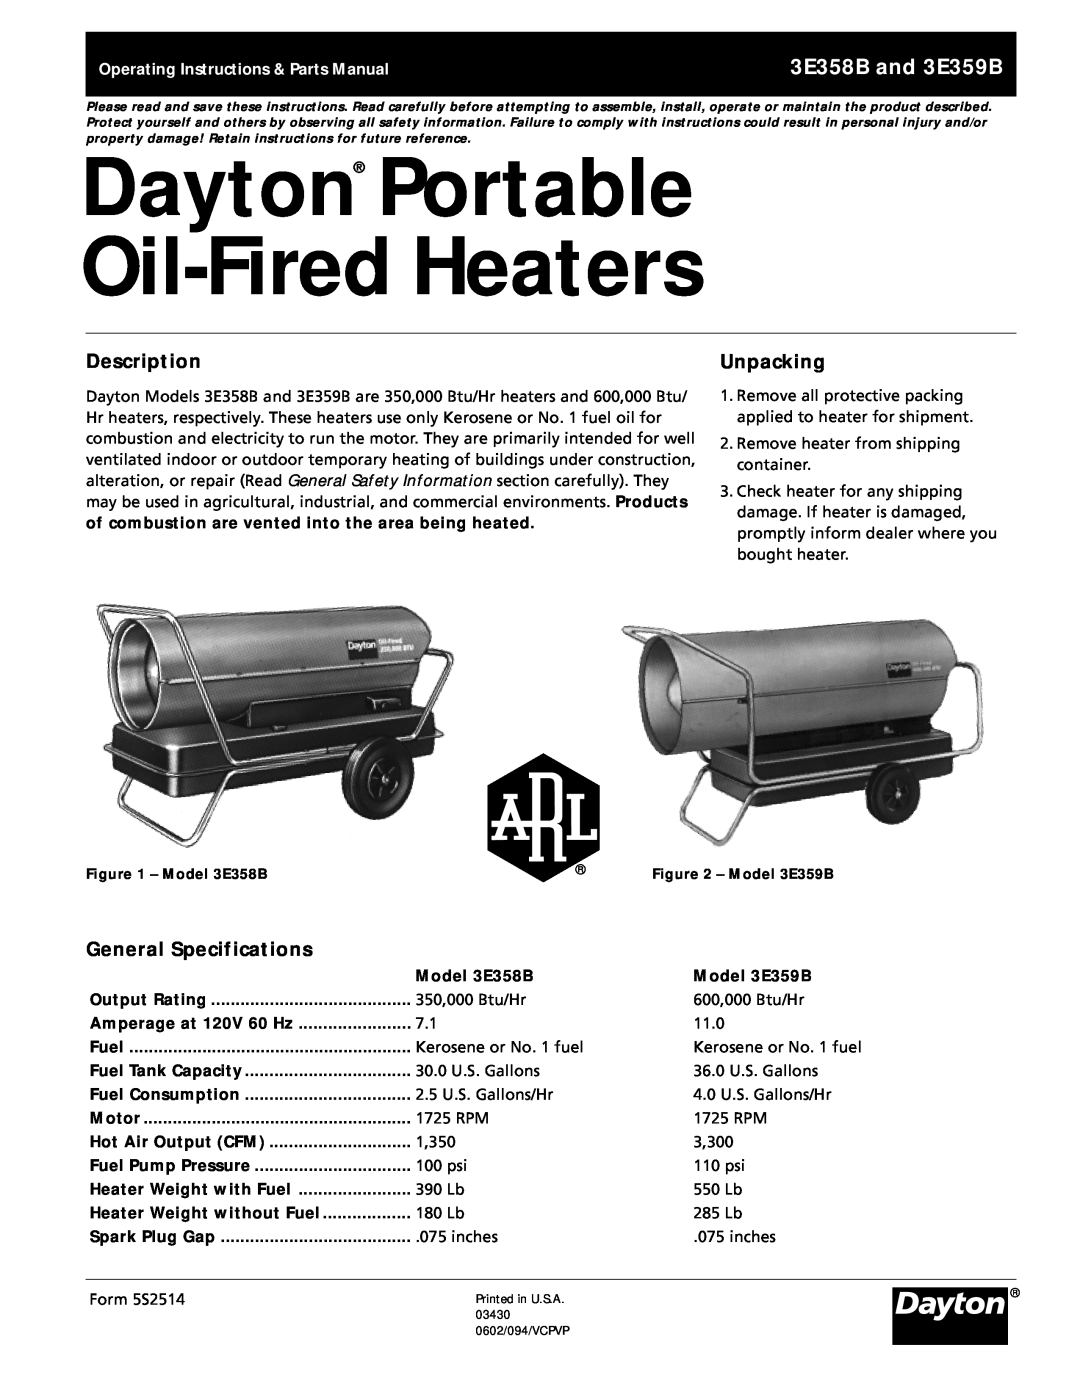 Dayton specifications Dayton Portable Oil-FiredHeaters, 3E358B and 3E359B, Operating Instructions & Parts Manual 